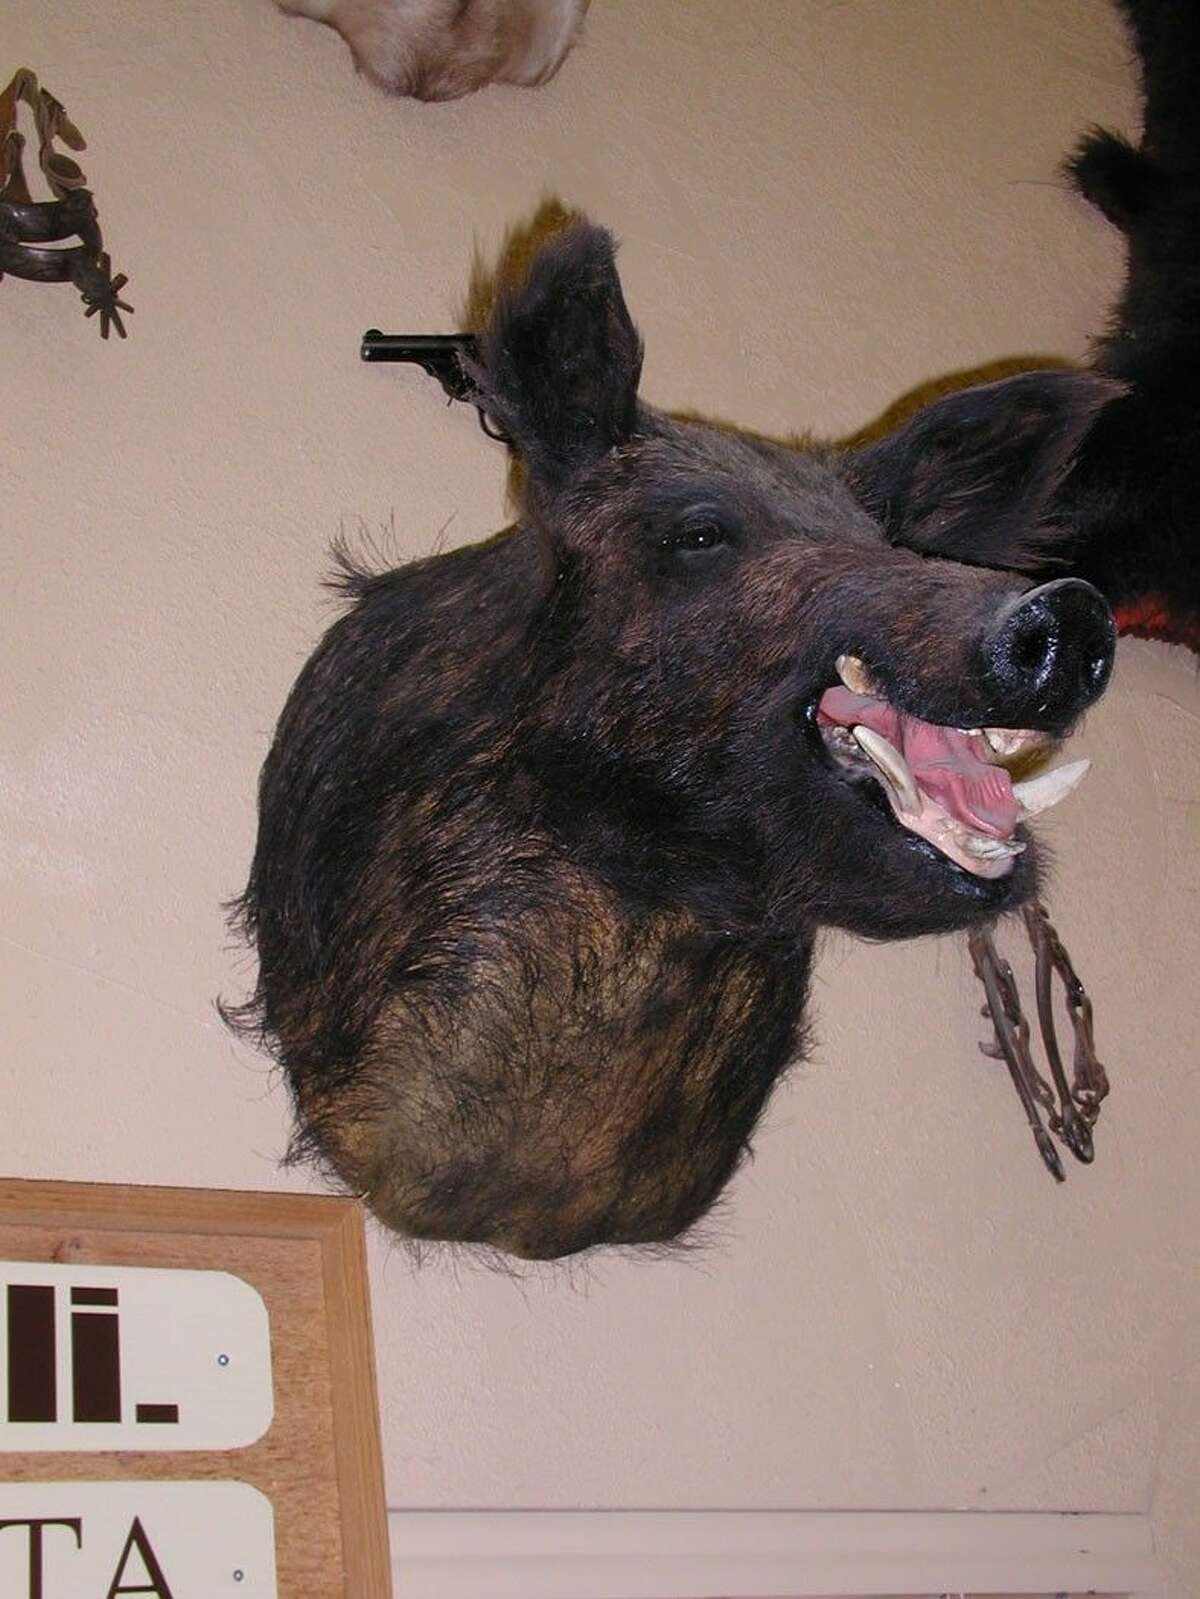 Photo by Larry J. LeBlancThis feral hog boar is hanging on the wall, but you can see it would be nothing to play with in the wild.